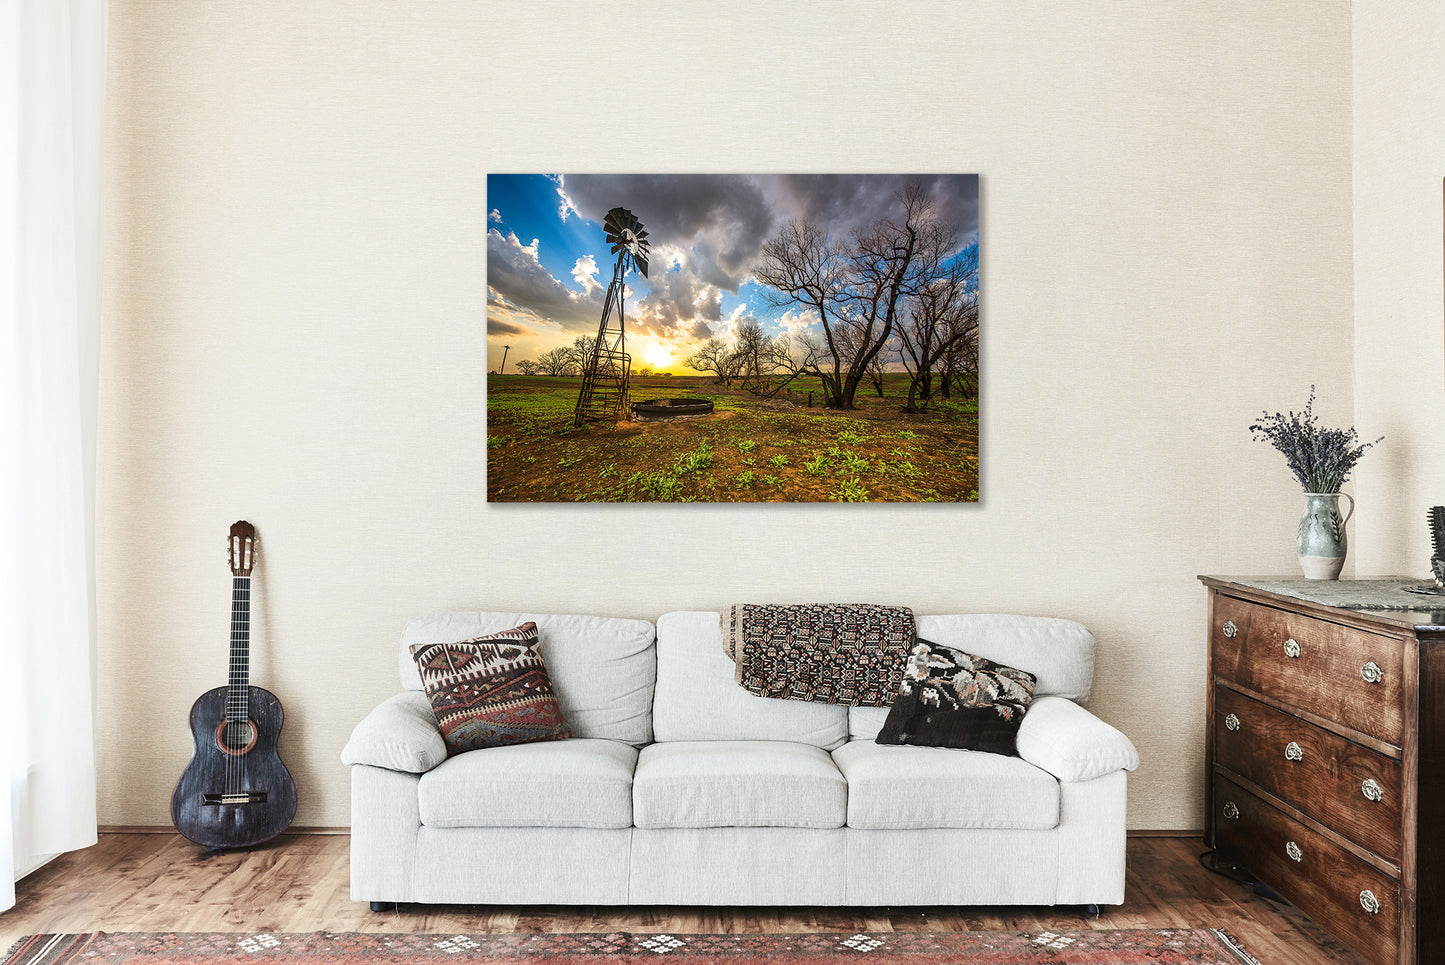 Country Metal Print (Ready to Hang) Photo on Aluminum of Old Windmill and Charred Trees at Sunset in Kansas Farm Wall Art Farmhouse Decor